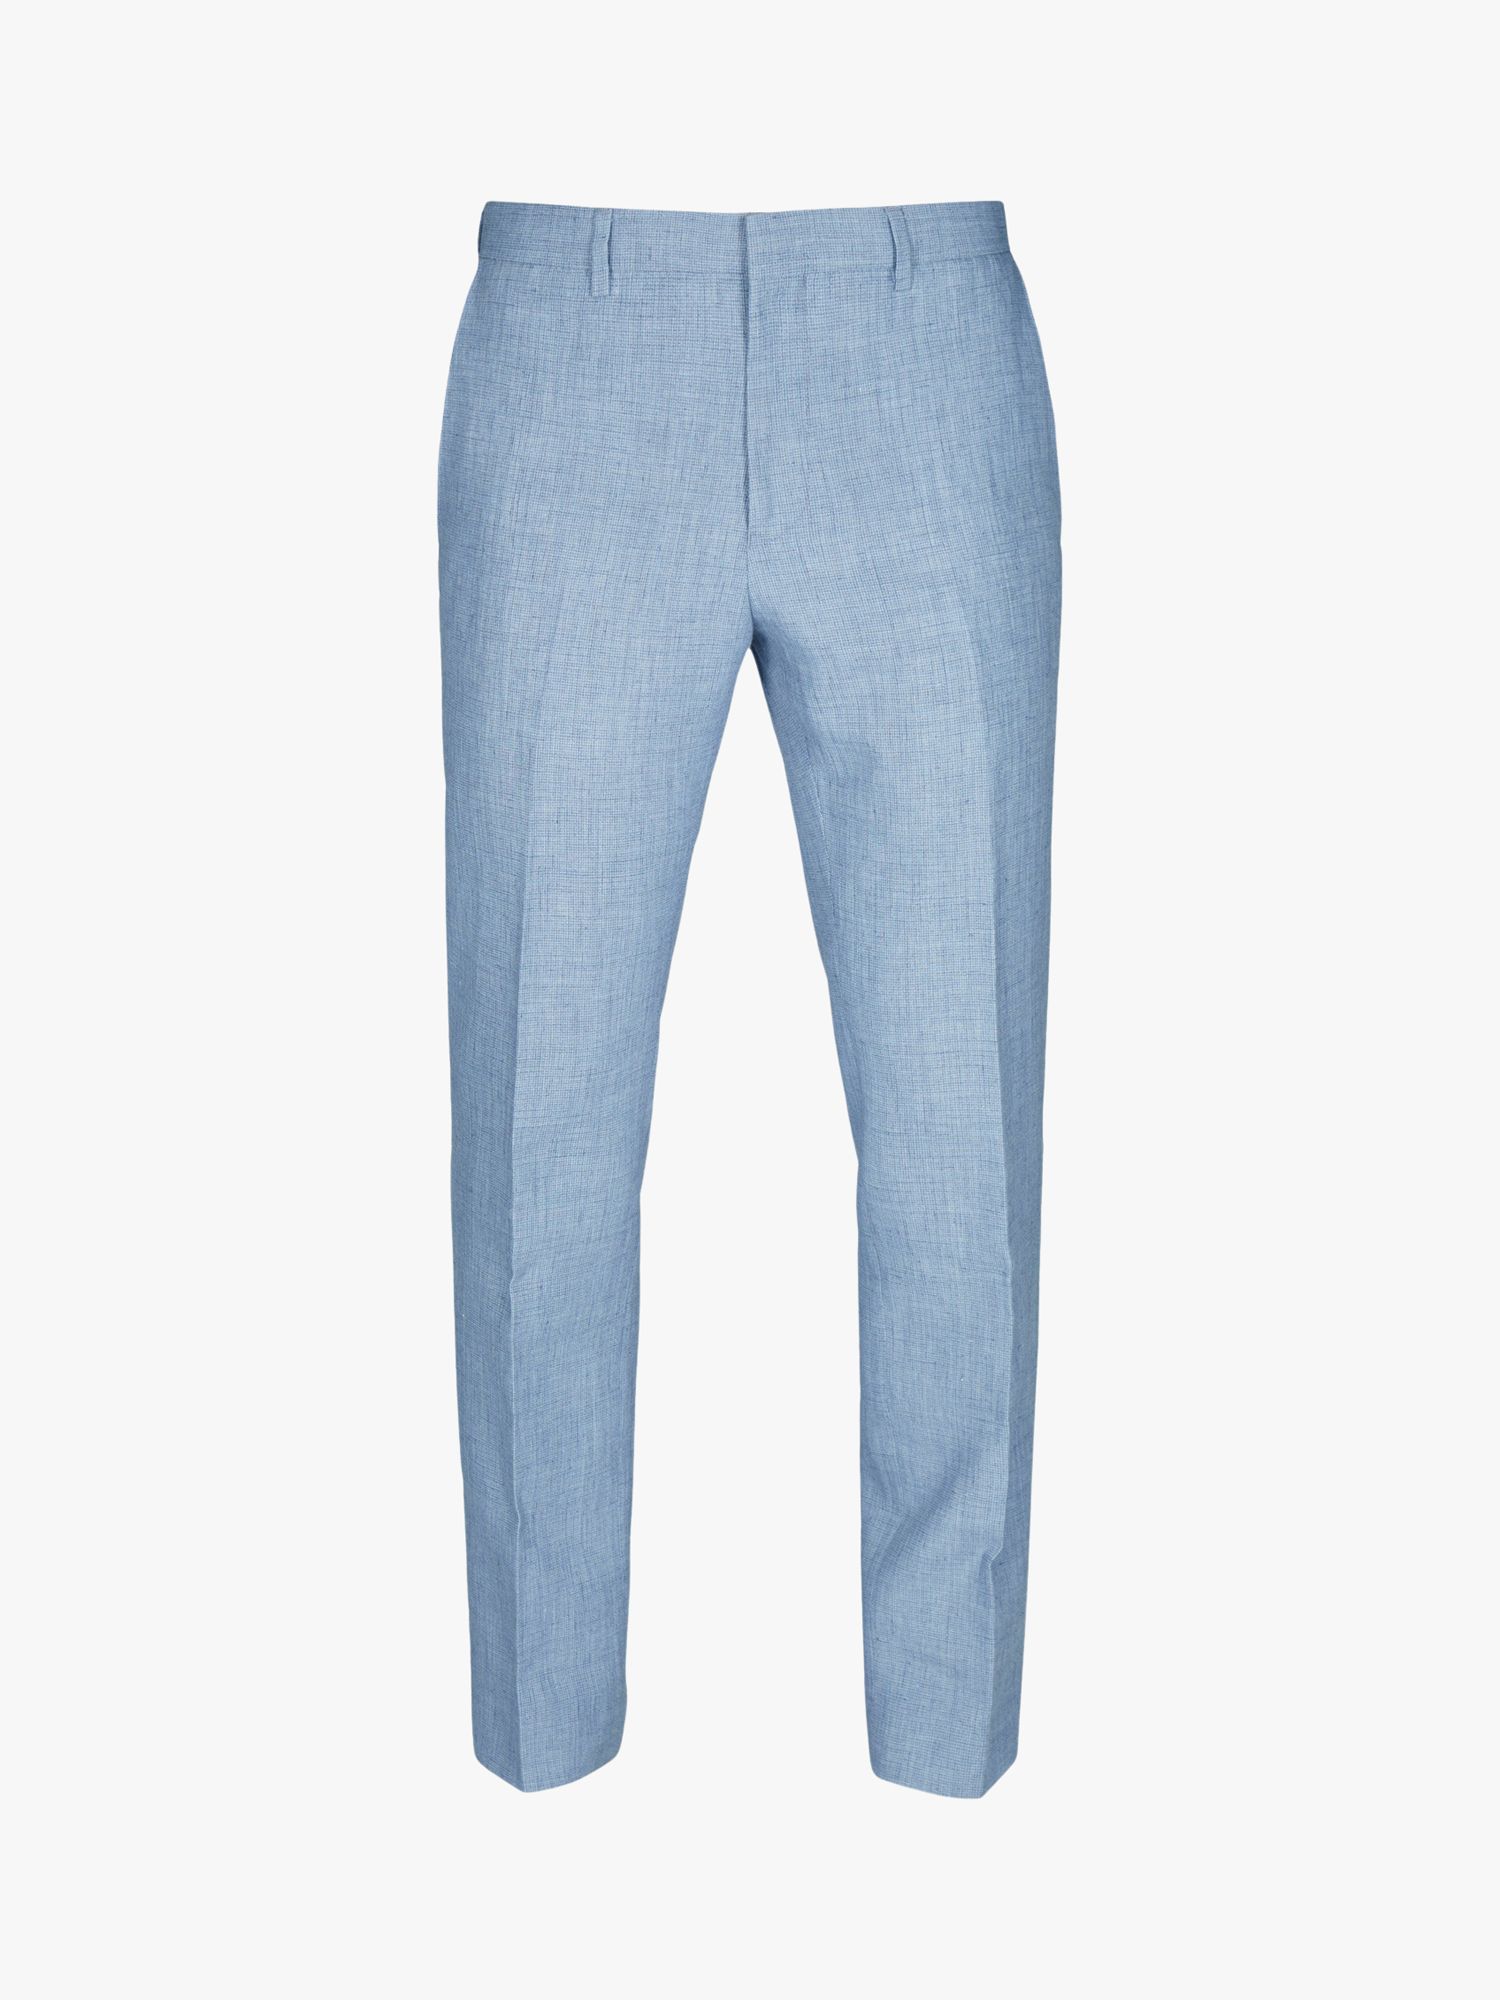 Buy Ted Baker Hydra Linen Slim Fit Trousers, Blue Online at johnlewis.com